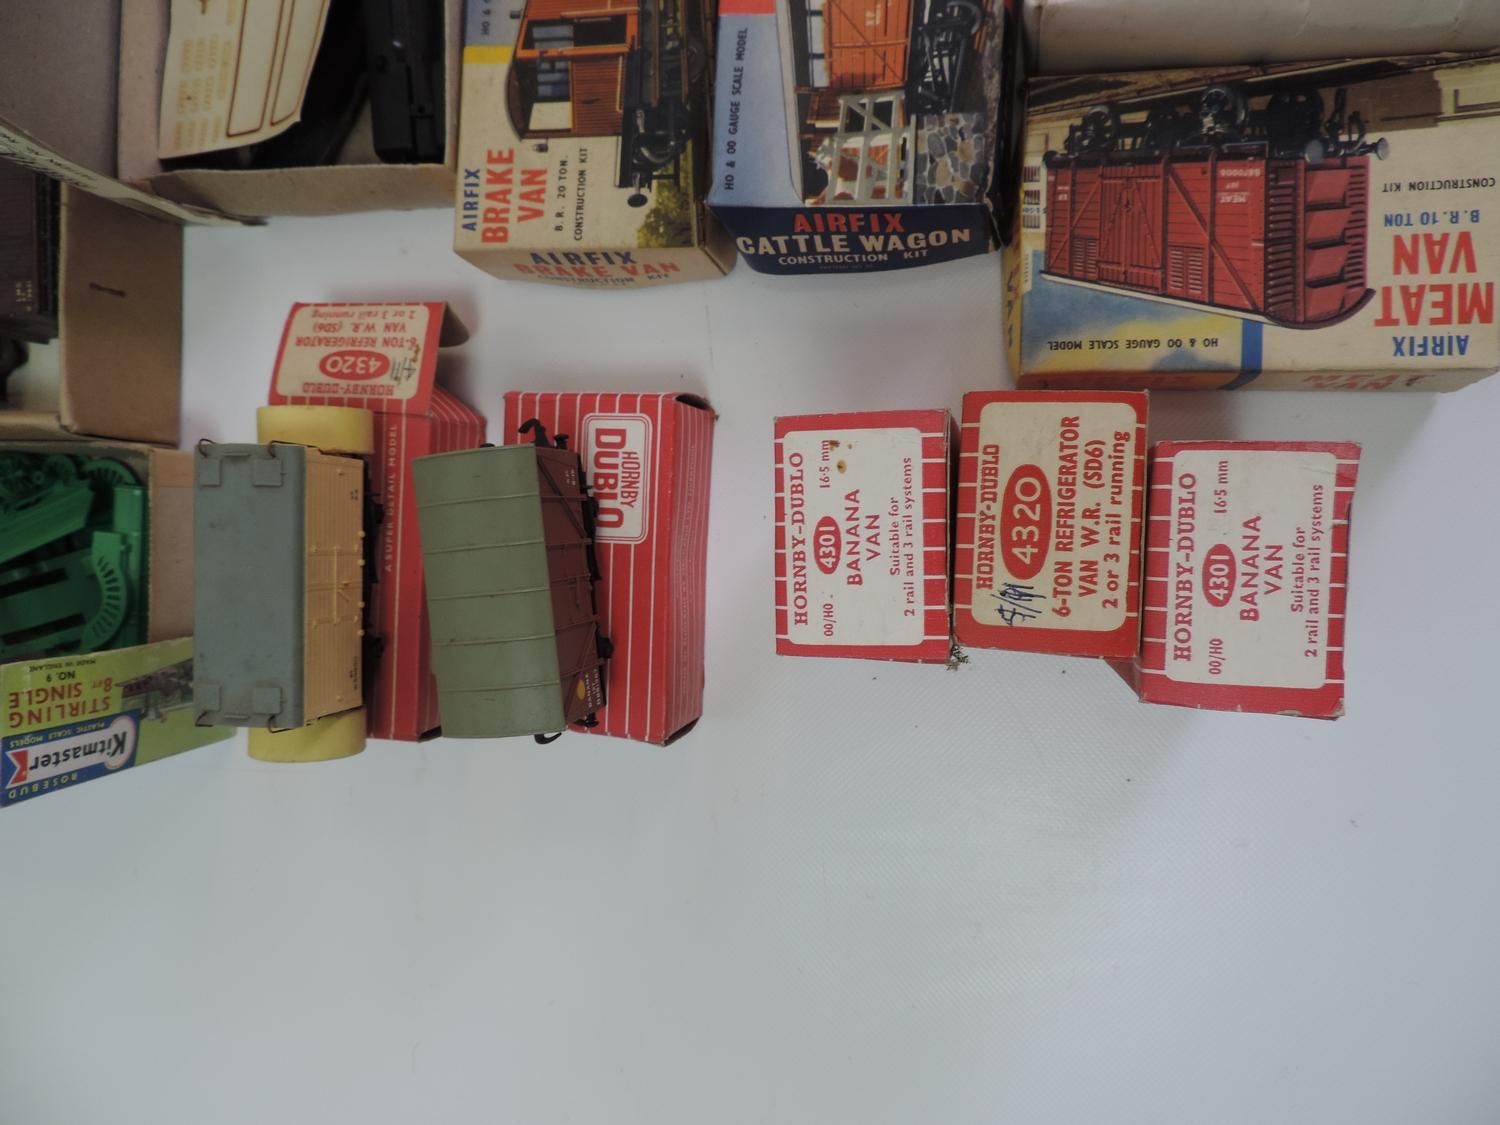 Large Quantity of Model Railway - Kit Master, Hornby, Airfix etc - Not All Box Contents Checked - Image 6 of 6